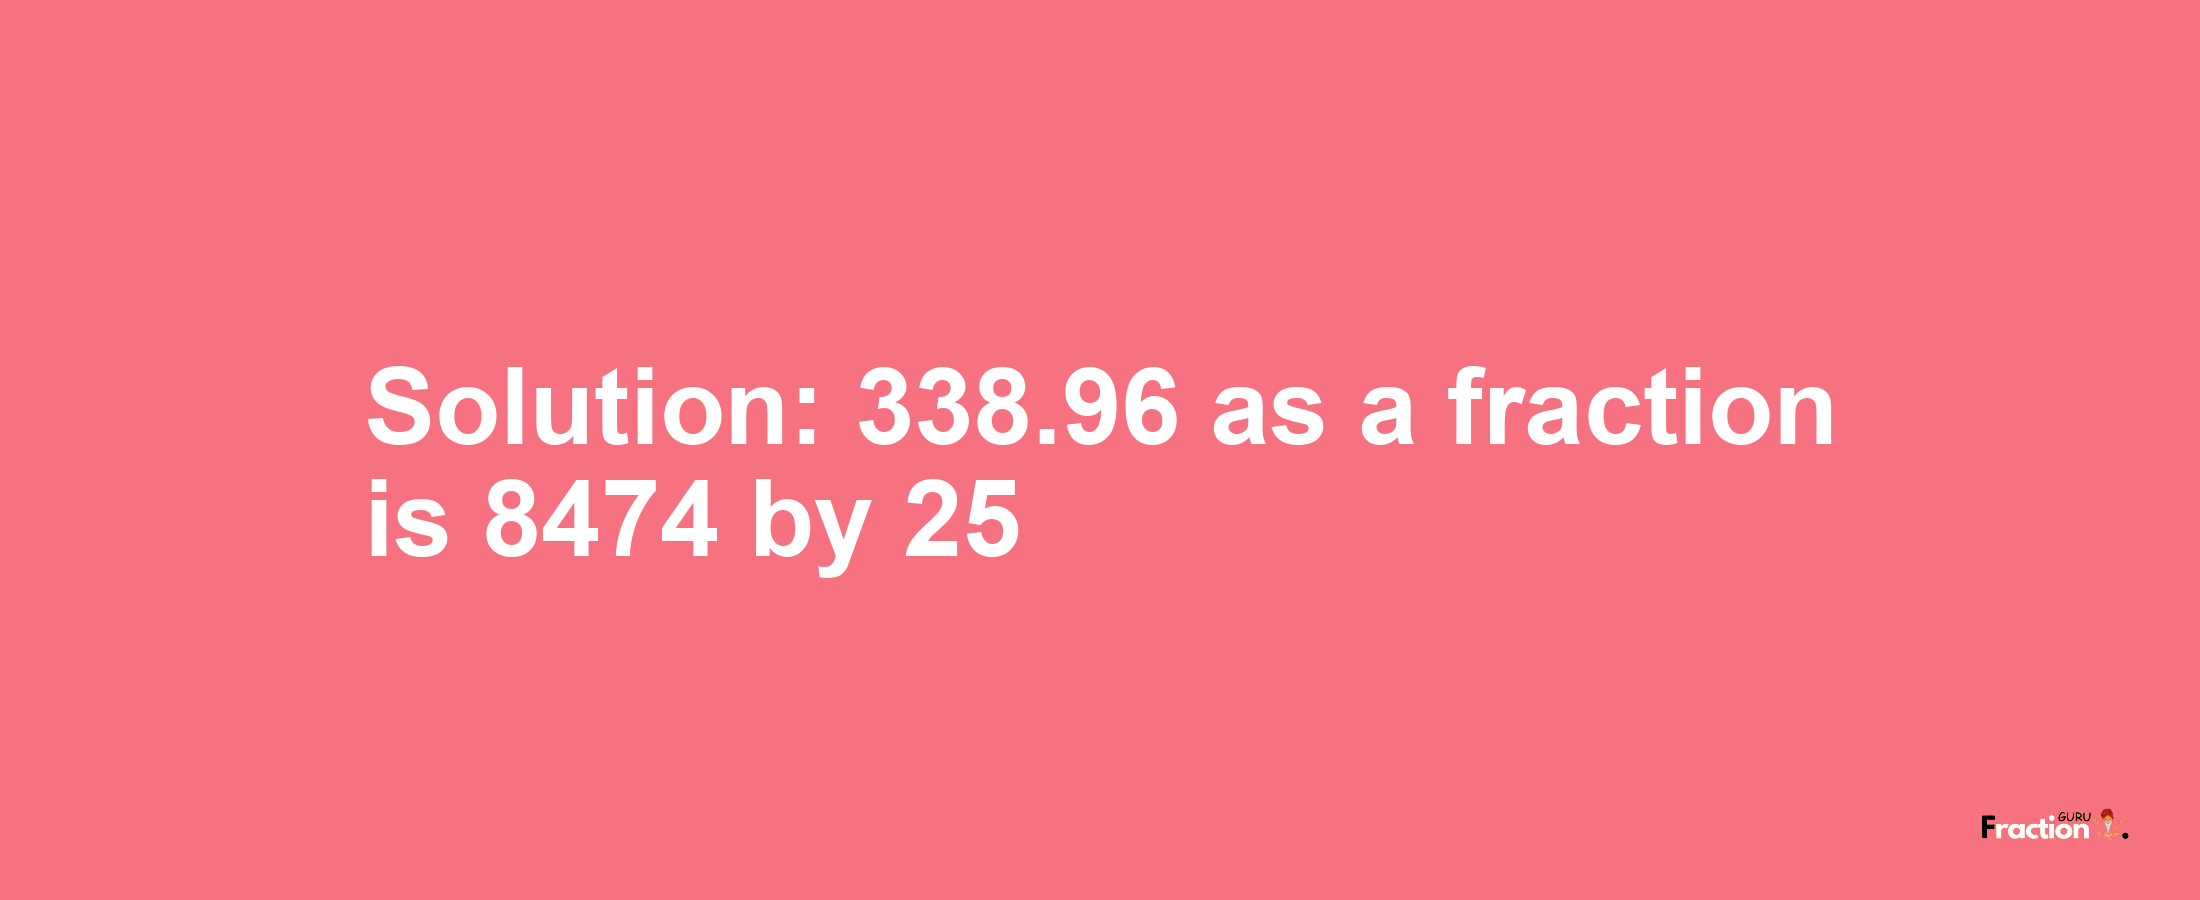 Solution:338.96 as a fraction is 8474/25